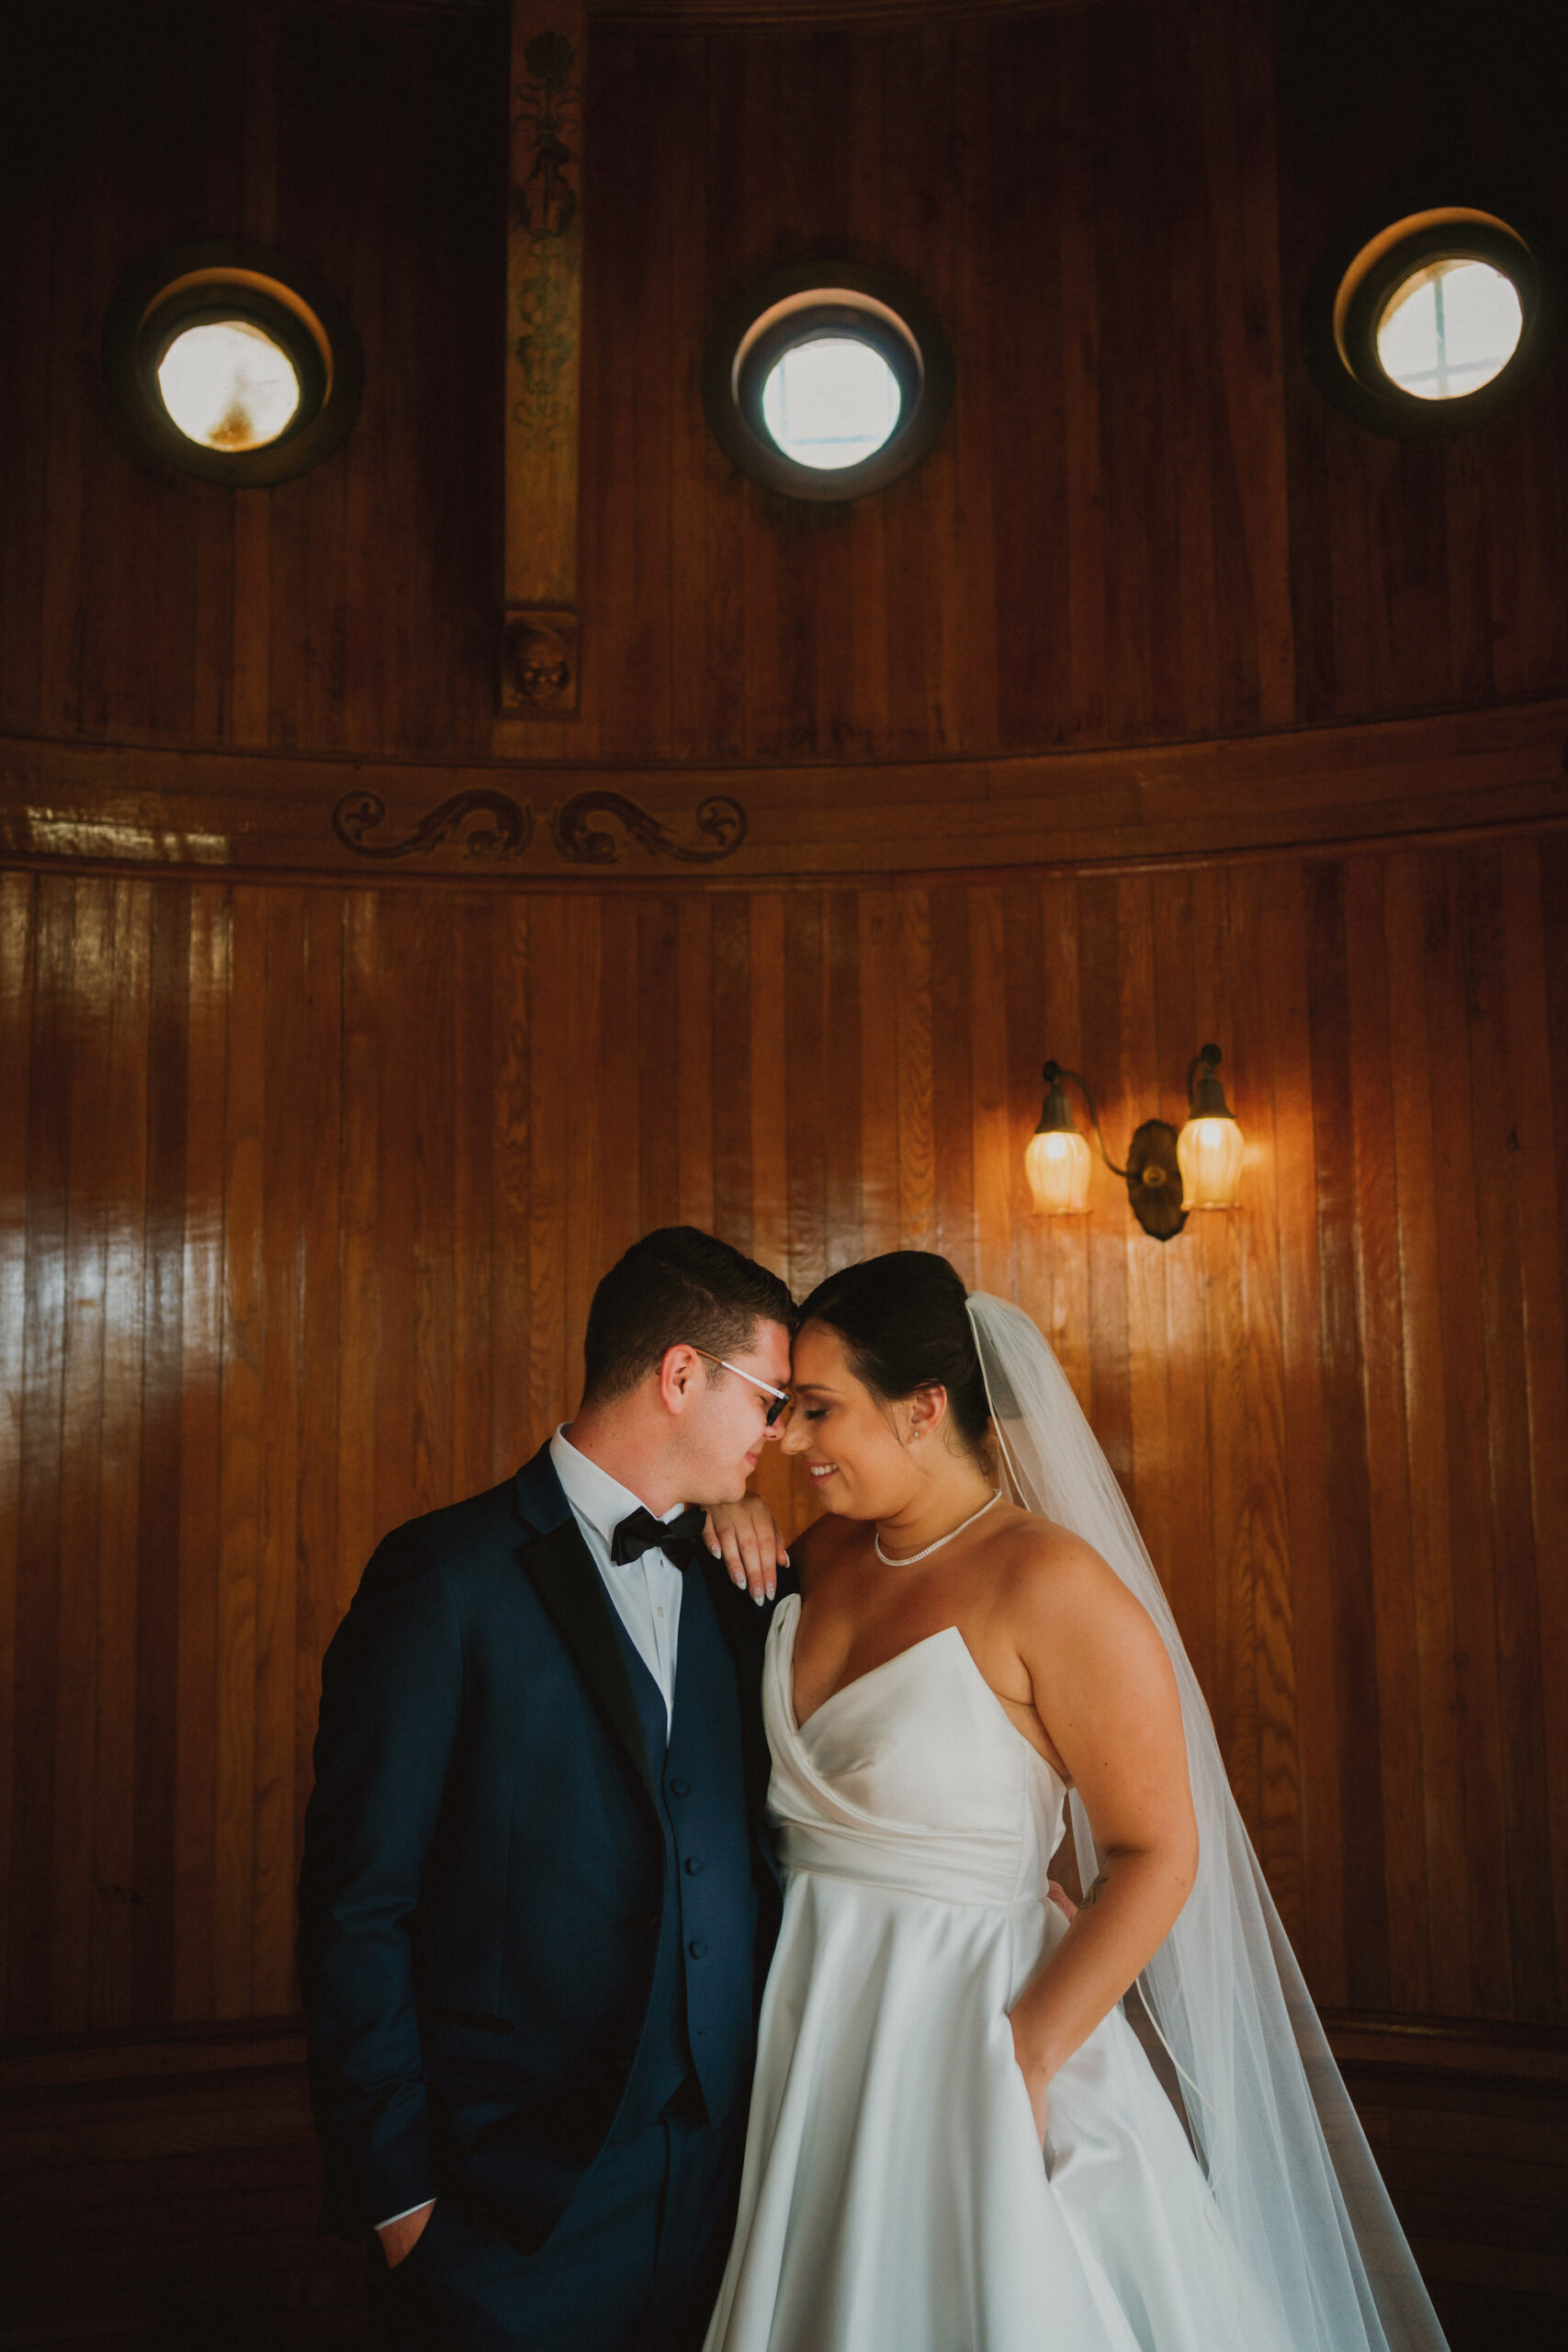 Intimate Bride and Groom Wedding Portrait | Dark and Moody Lighing | Tampa Bay Photographer Videographer Mars and the Moon